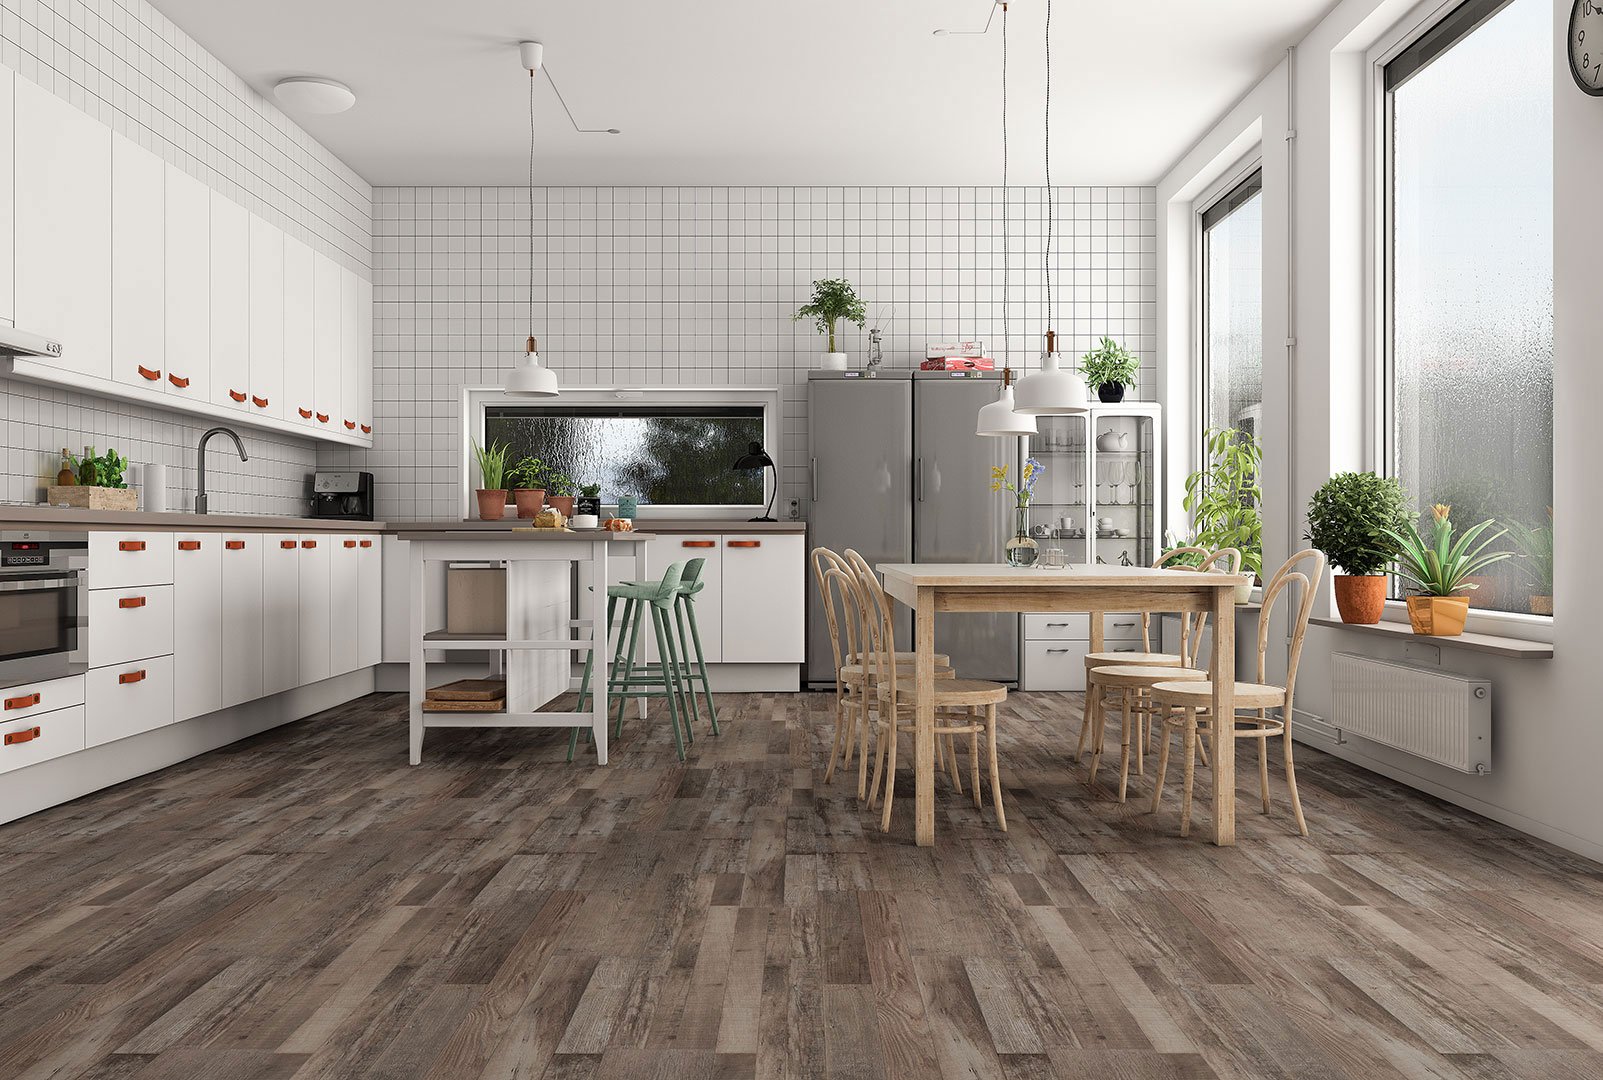 Pros and Cons of Vinyl Flooring in Your Kitchen